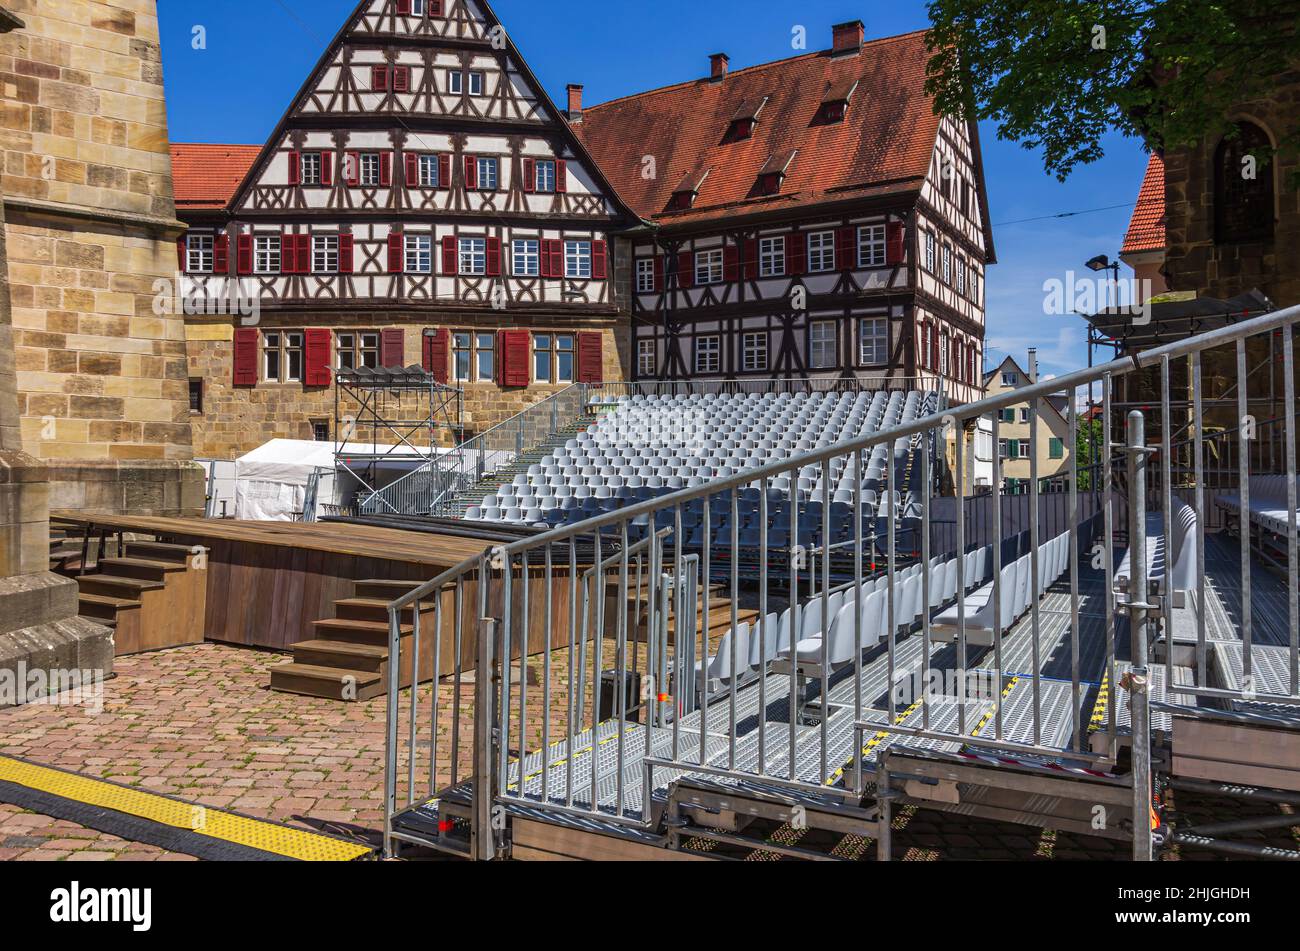 Esslingen am Neckar, Baden-Württemberg, Germany - May 28, 2017: Empty stage and grandstand for open air events on the South side of the town church. Stock Photo